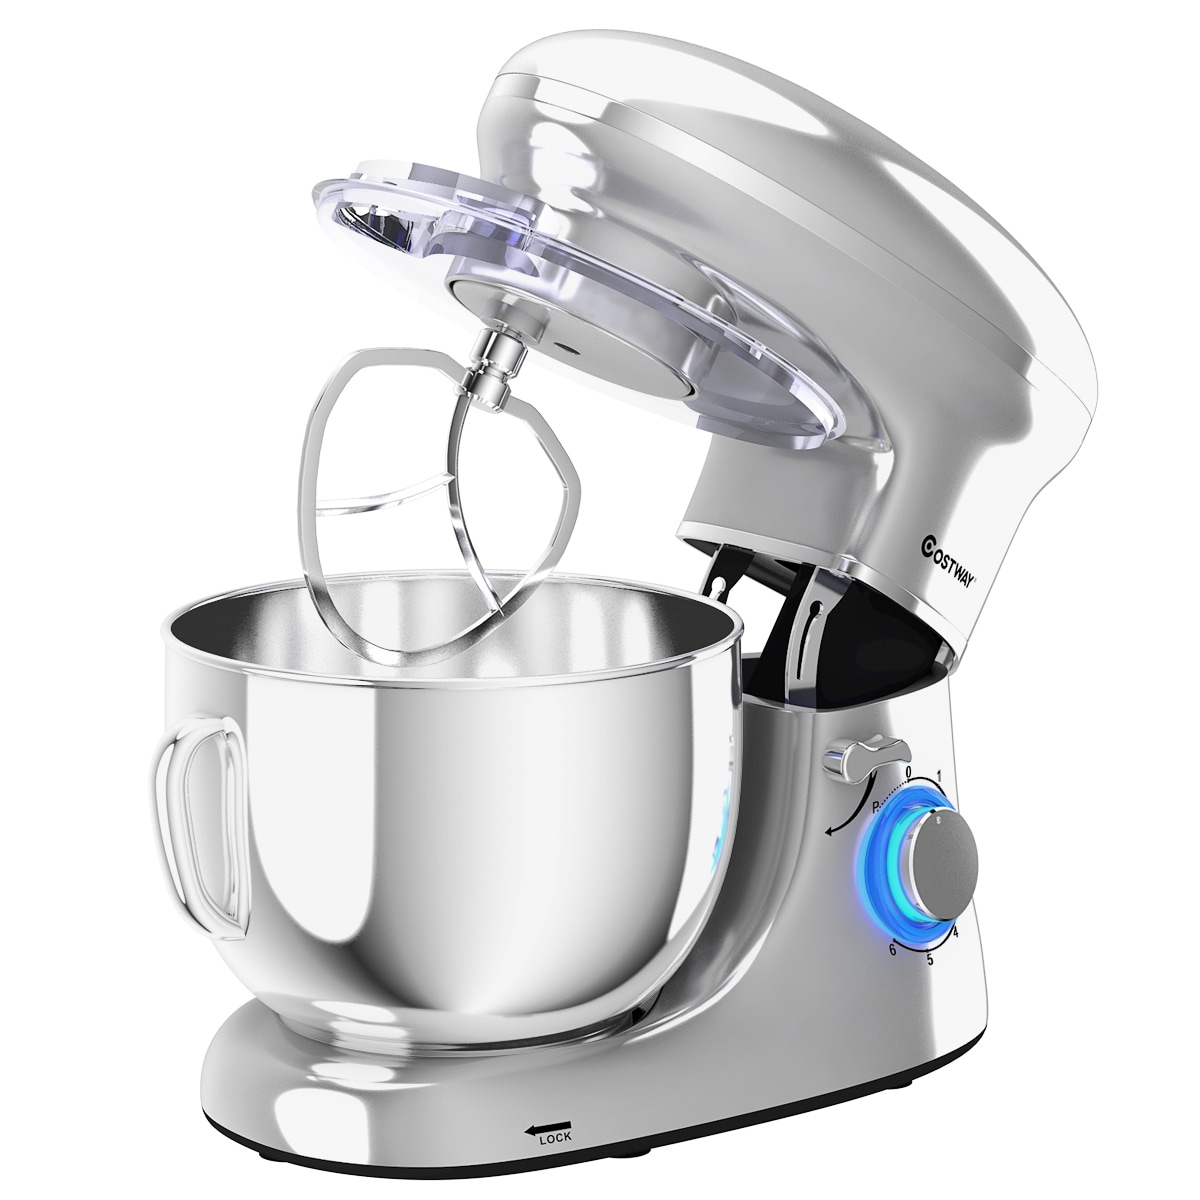 https://ak1.ostkcdn.com/images/products/is/images/direct/8fb496e609c46b20a6ac9e115c995ef7f1186033/6.3Qt-Electric-Tilt-Head-Food-Stand-Mixer-6-Speed-660W.jpg